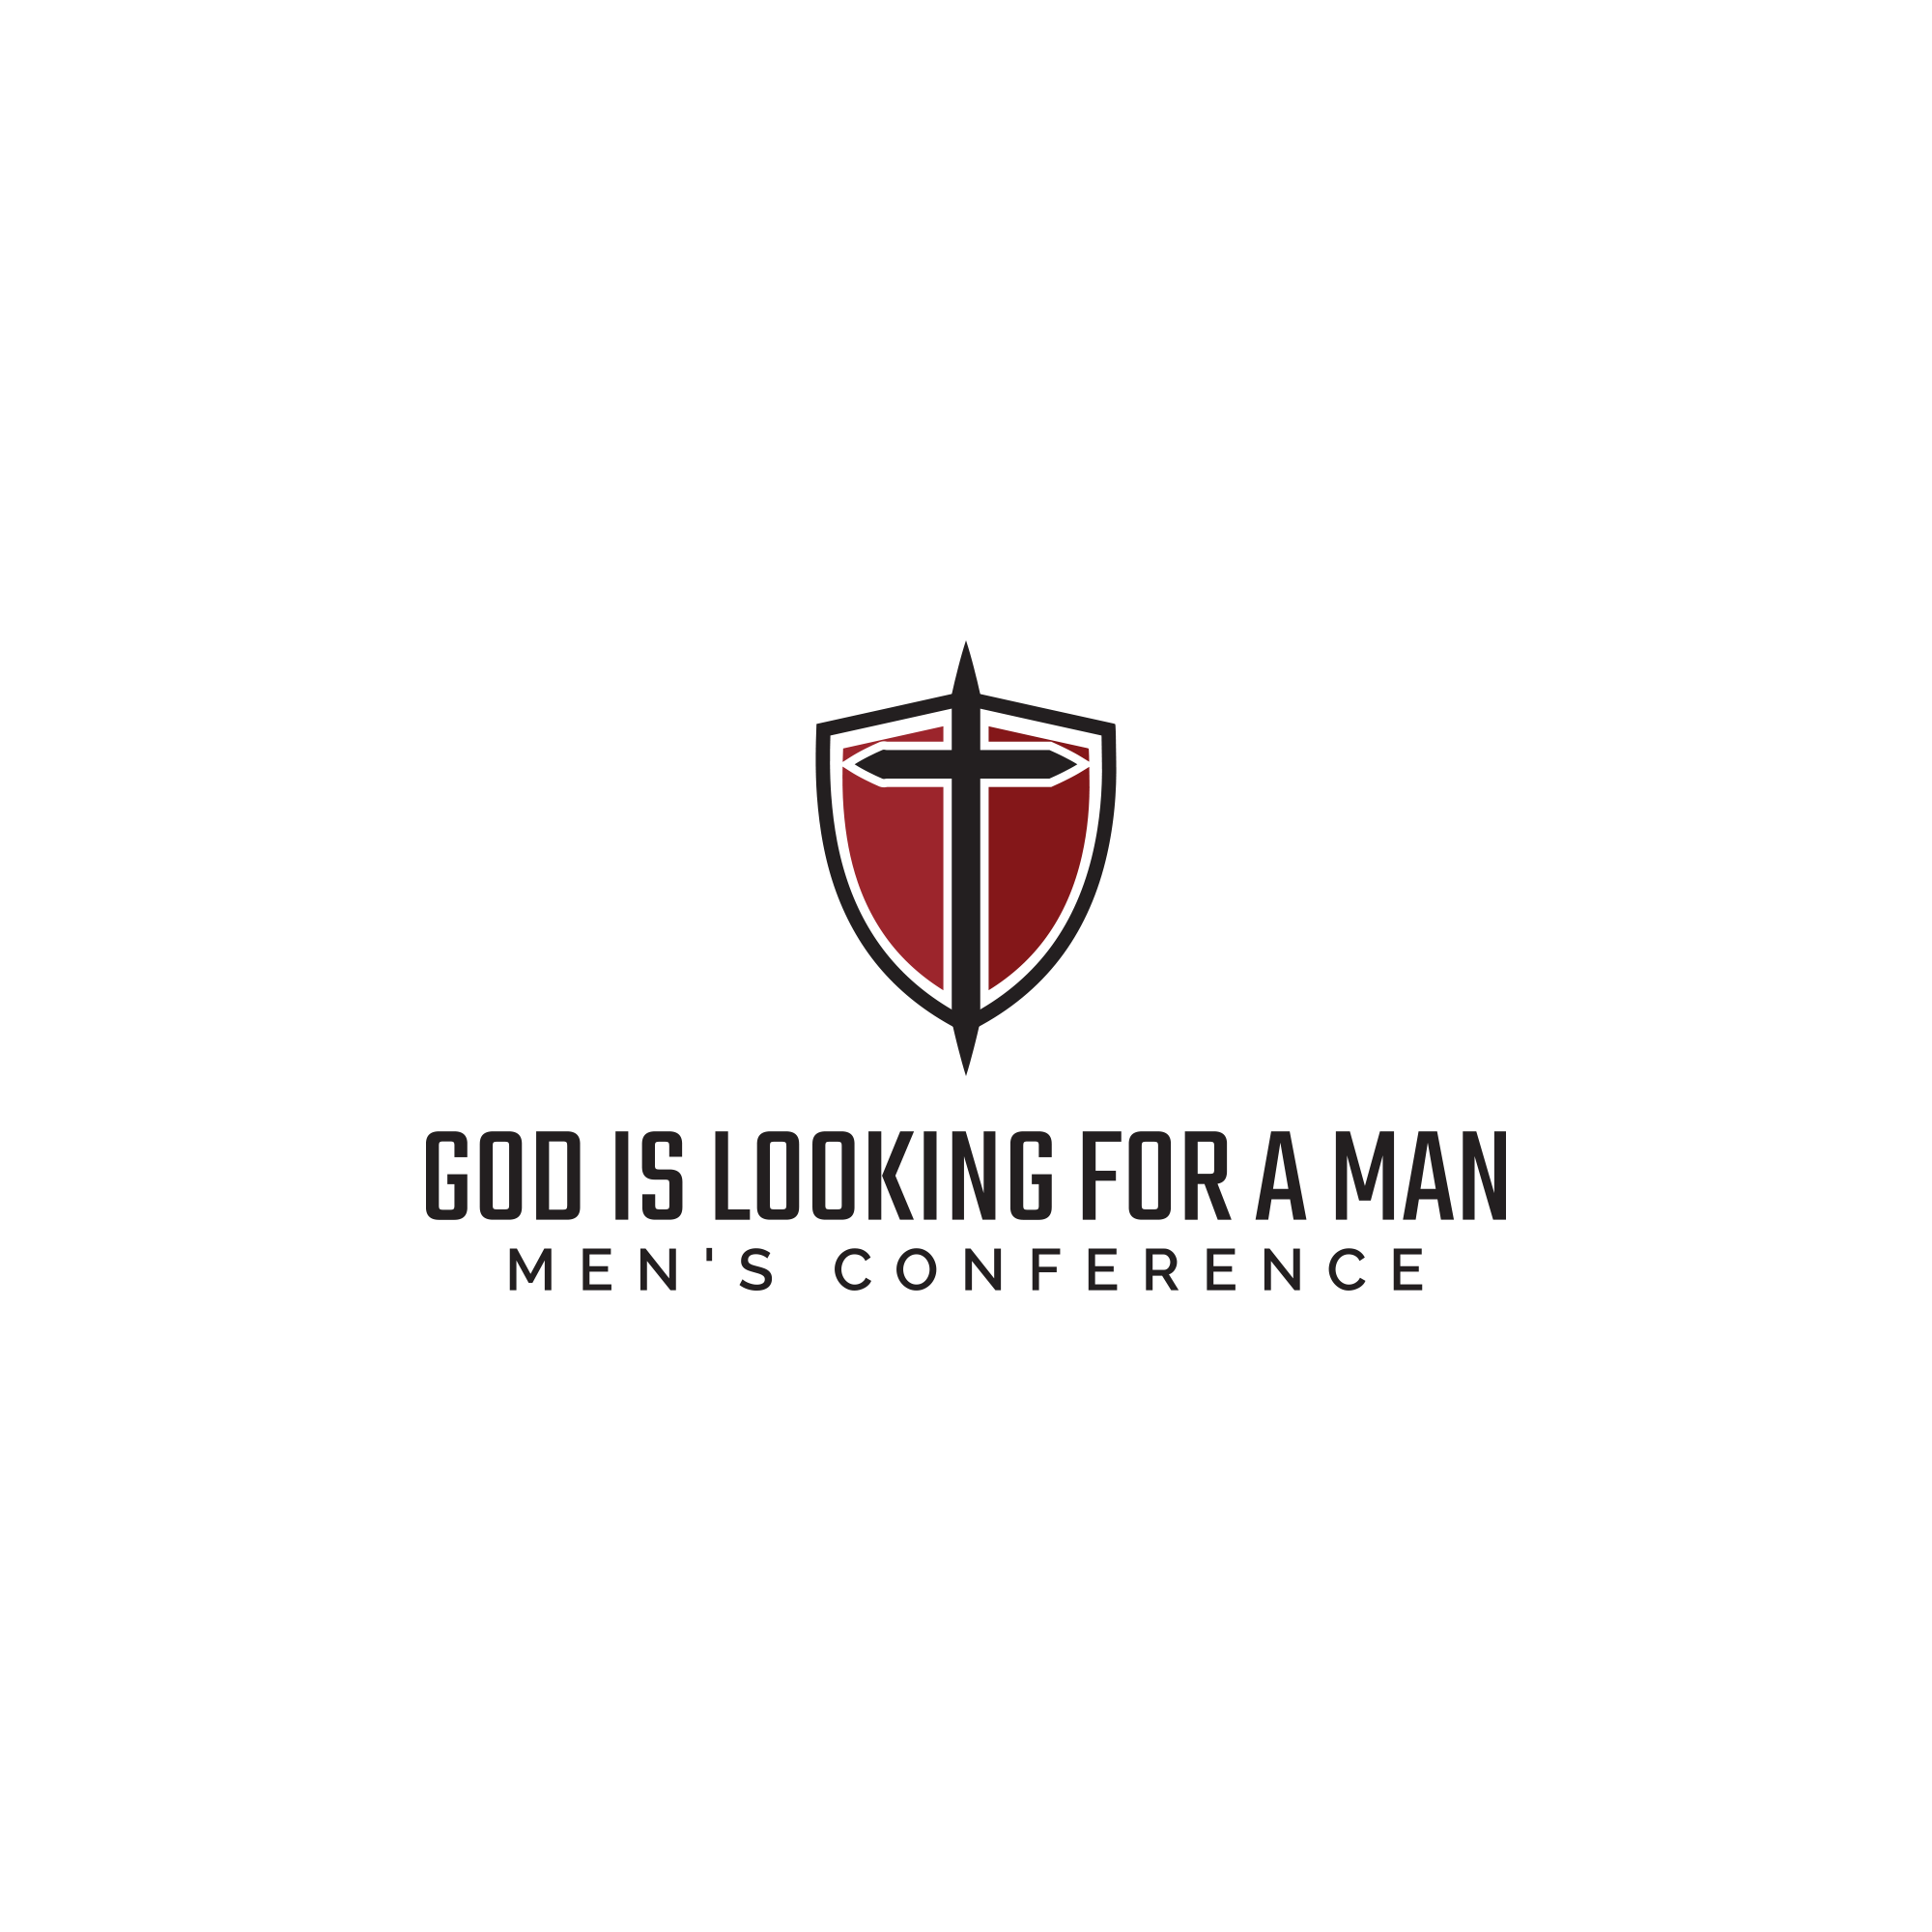 God Is Looking For A Man - Men's Conference August 13 2022 Corona Baptist Church